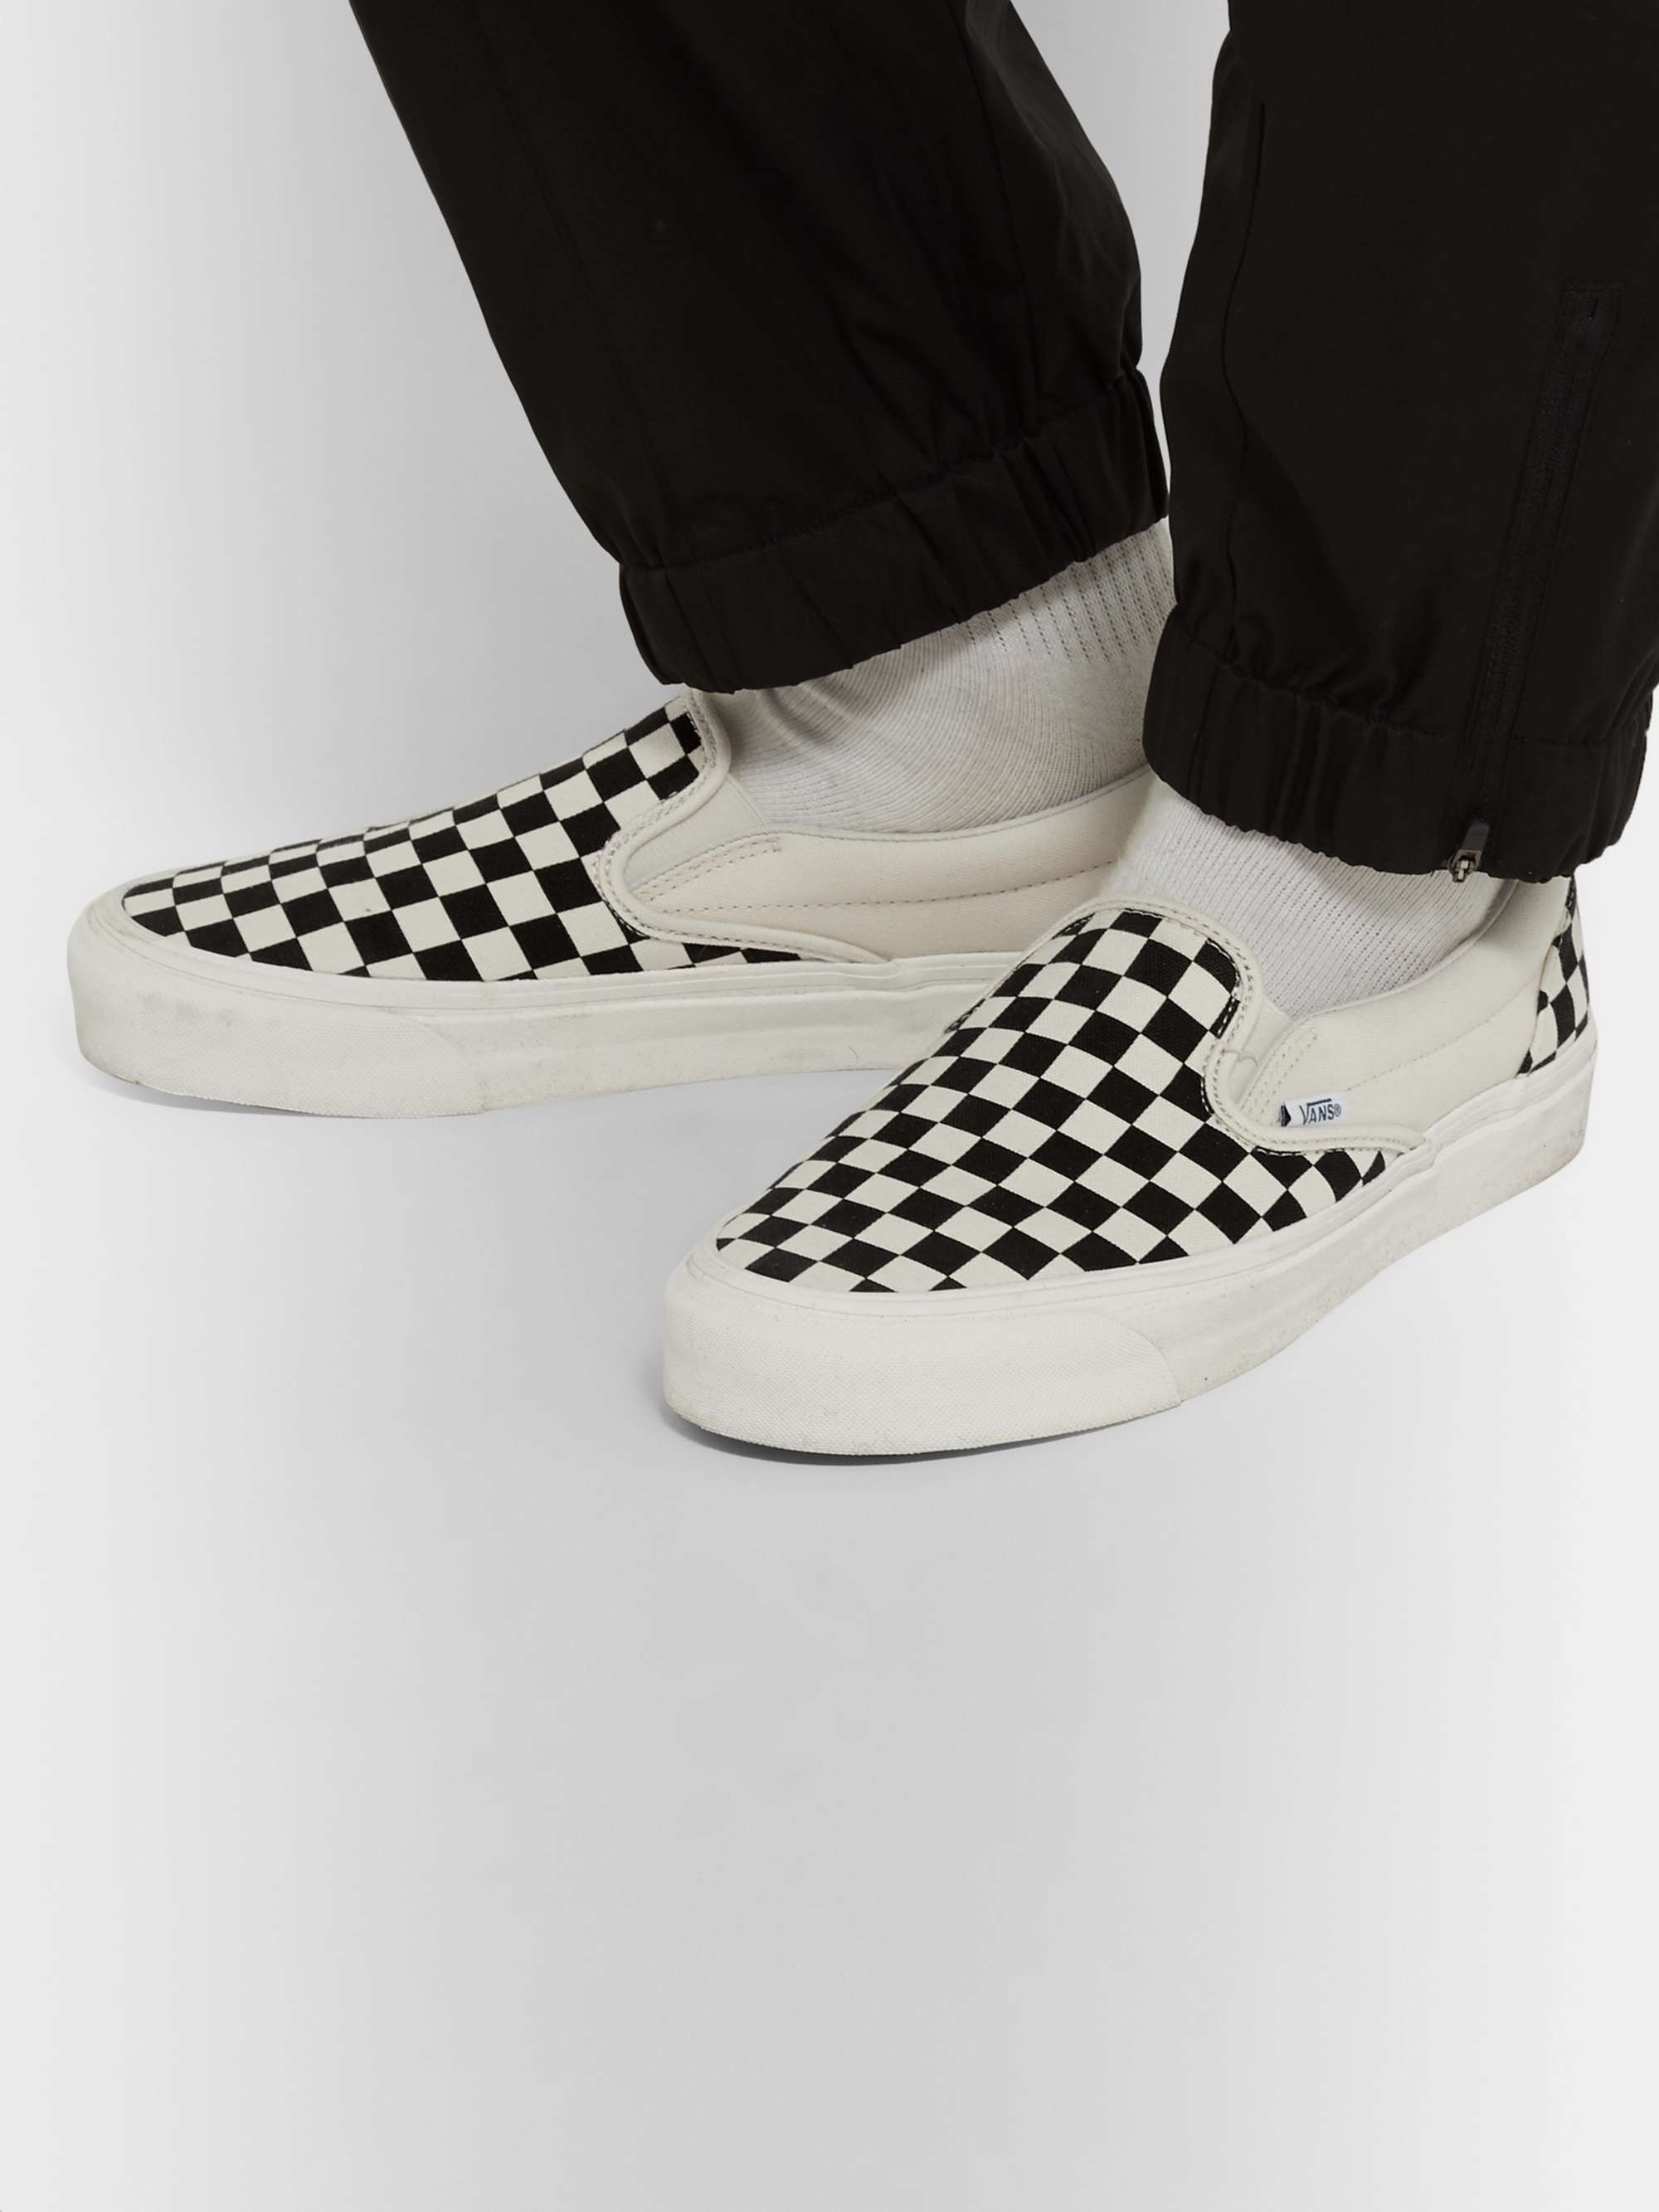 Vault By Vans OG Classic Slip-On LX Checkerboard Available